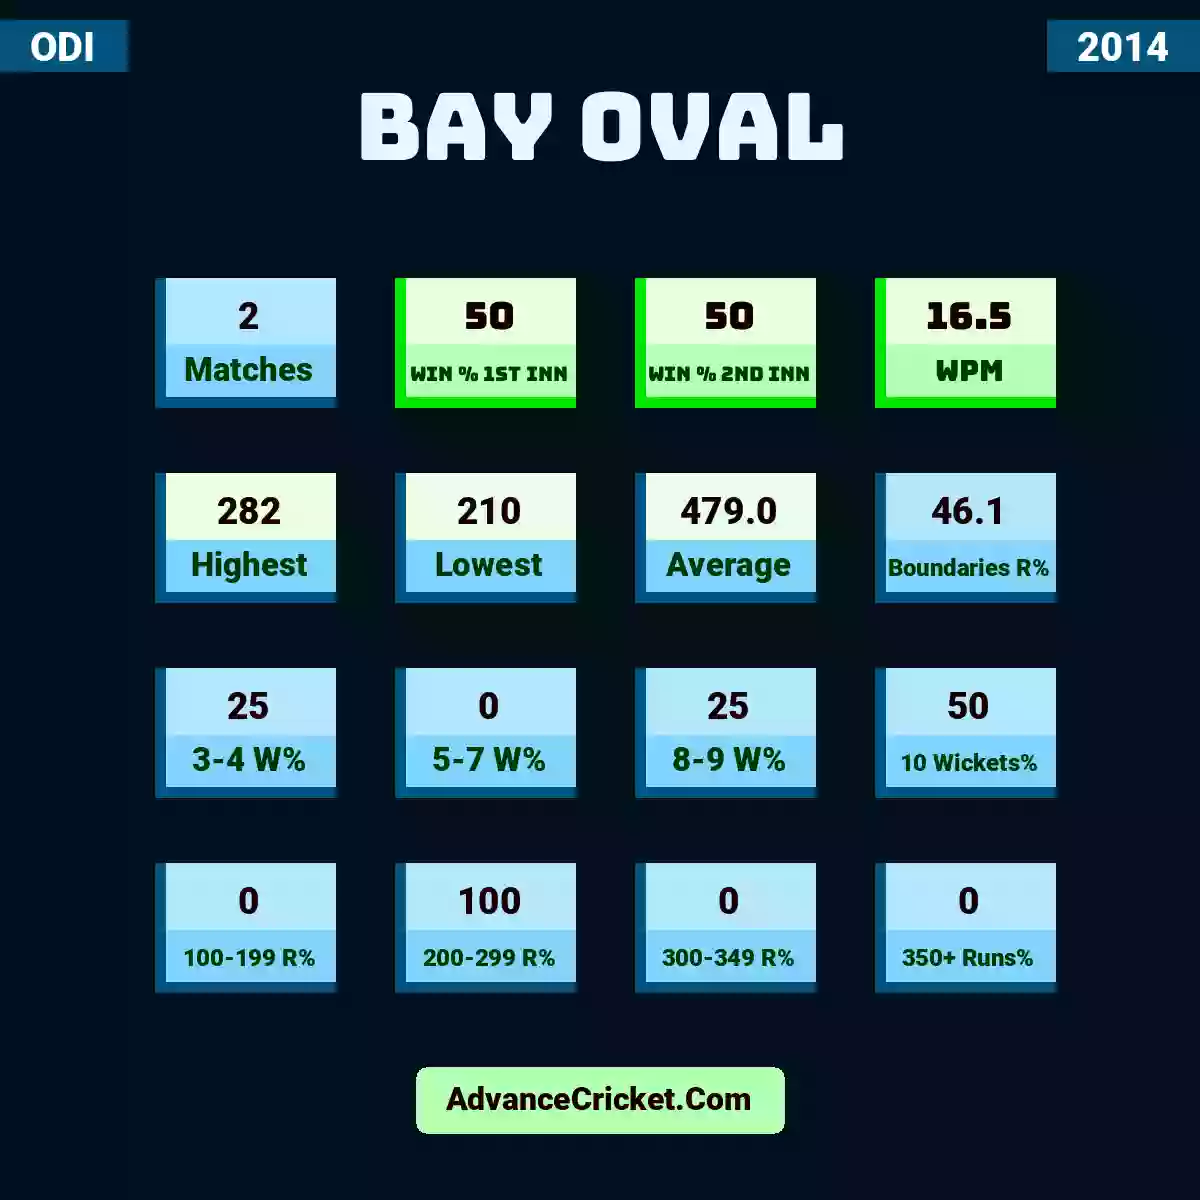 Image showing Bay Oval with Matches: 2, Win % 1st Inn: 50, Win % 2nd Inn: 50, WPM: 16.5, Highest: 282, Lowest: 210, Average: 479.0, Boundaries R%: 46.1, 3-4 W%: 25, 5-7 W%: 0, 8-9 W%: 25, 10 Wickets%: 50, 100-199 R%: 0, 200-299 R%: 100, 300-349 R%: 0, 350+ Runs%: 0.